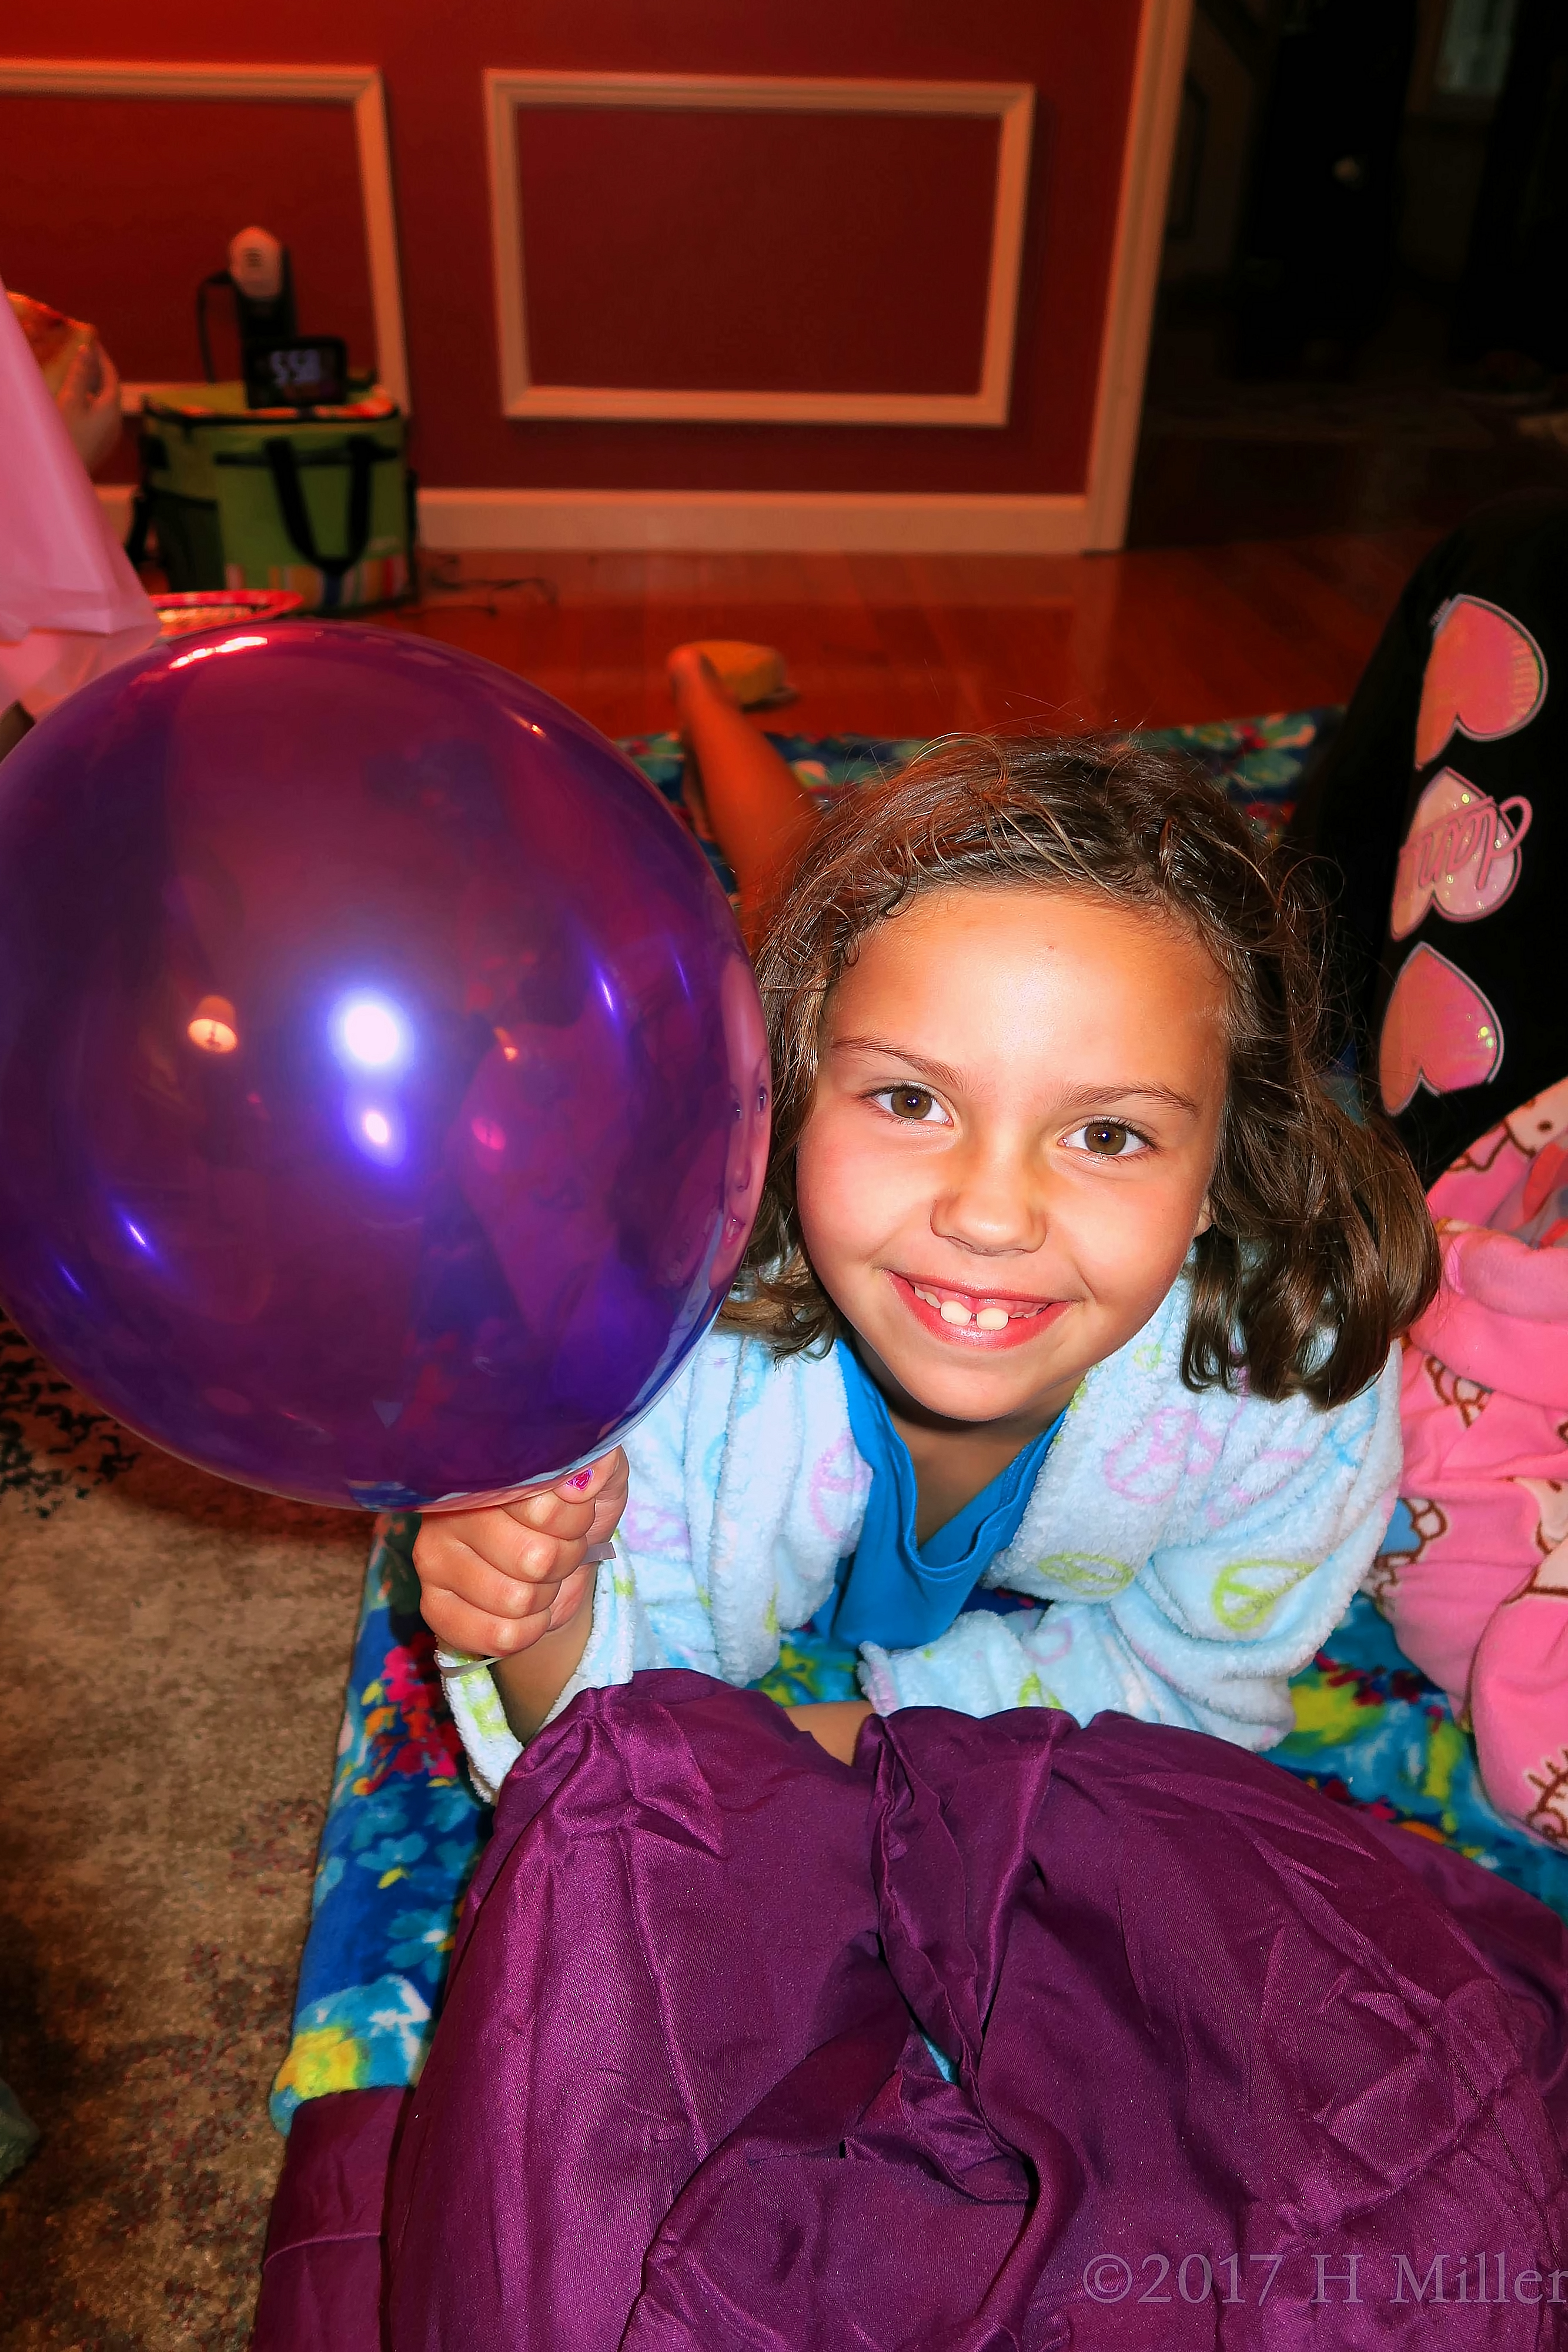 Posing With A Balloon At The Party For Kids. 